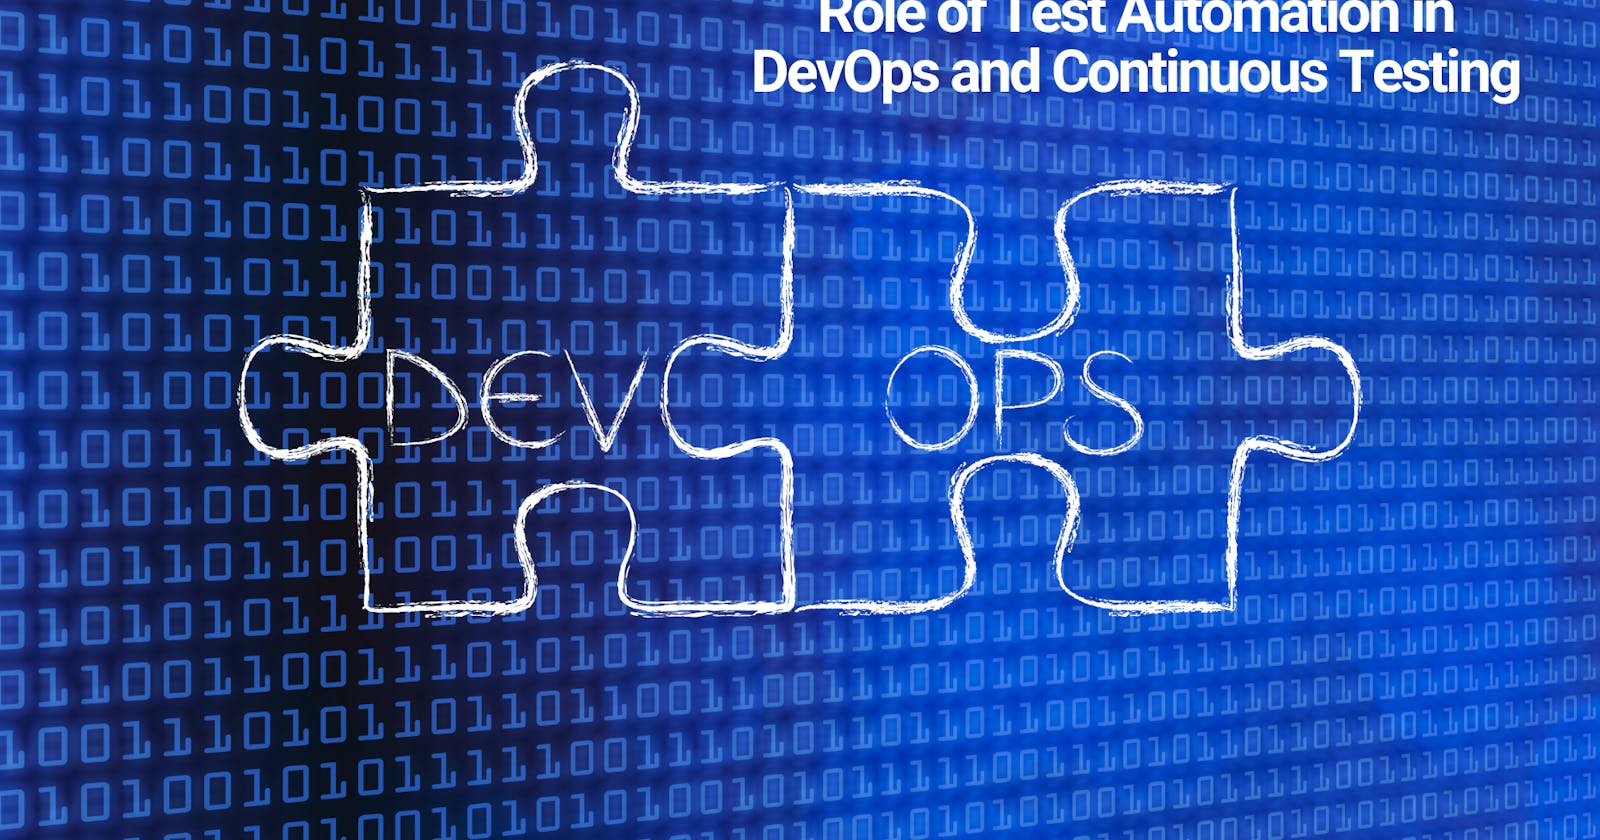 The Role of Test Automation in DevOps and Continuous Testing